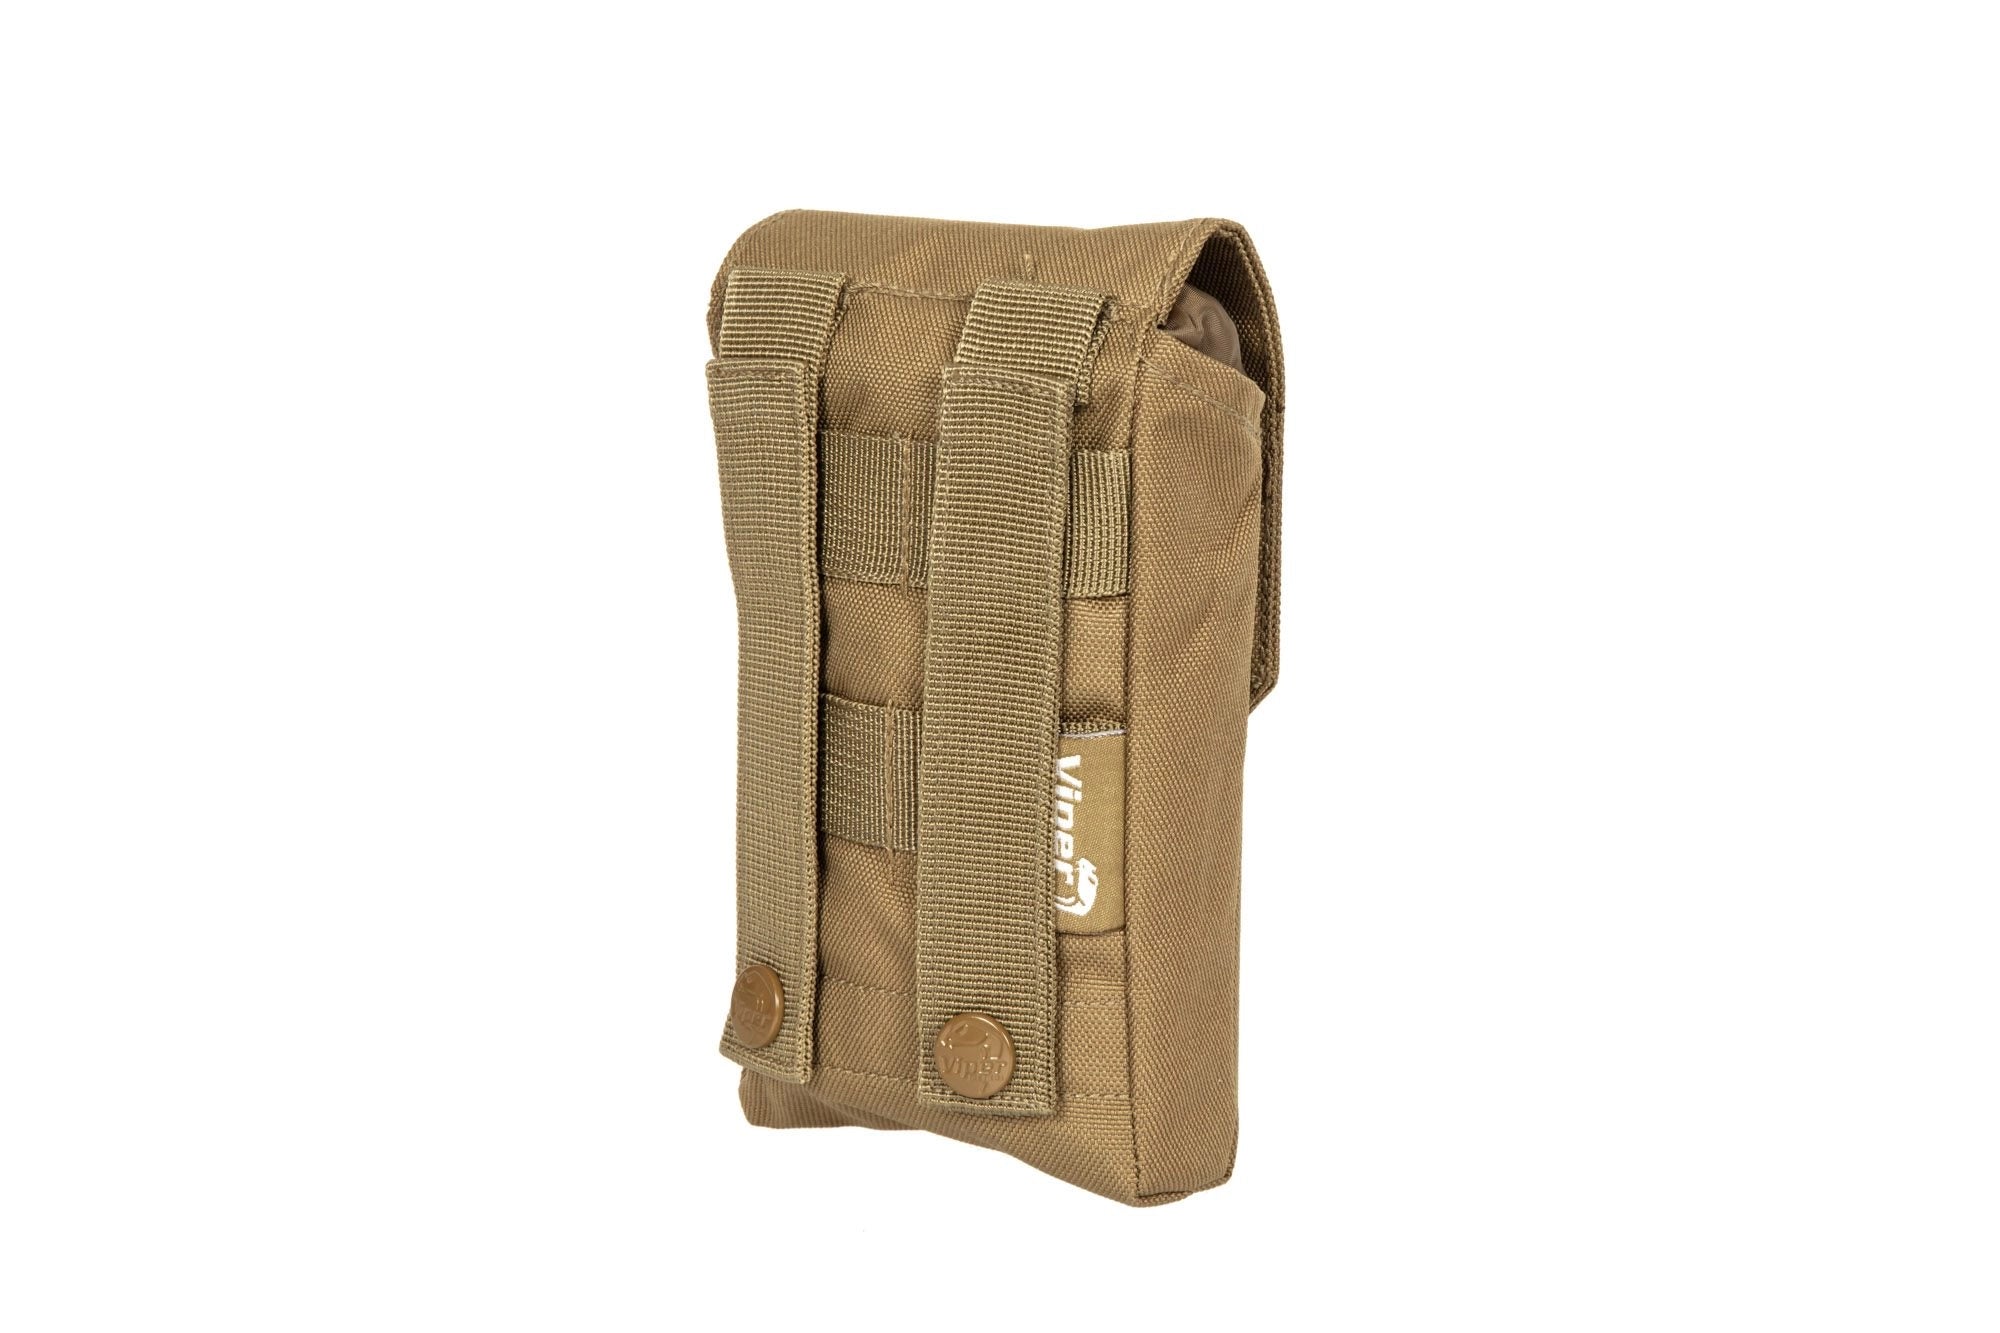 First Aid kit Pouch - Coyote-2